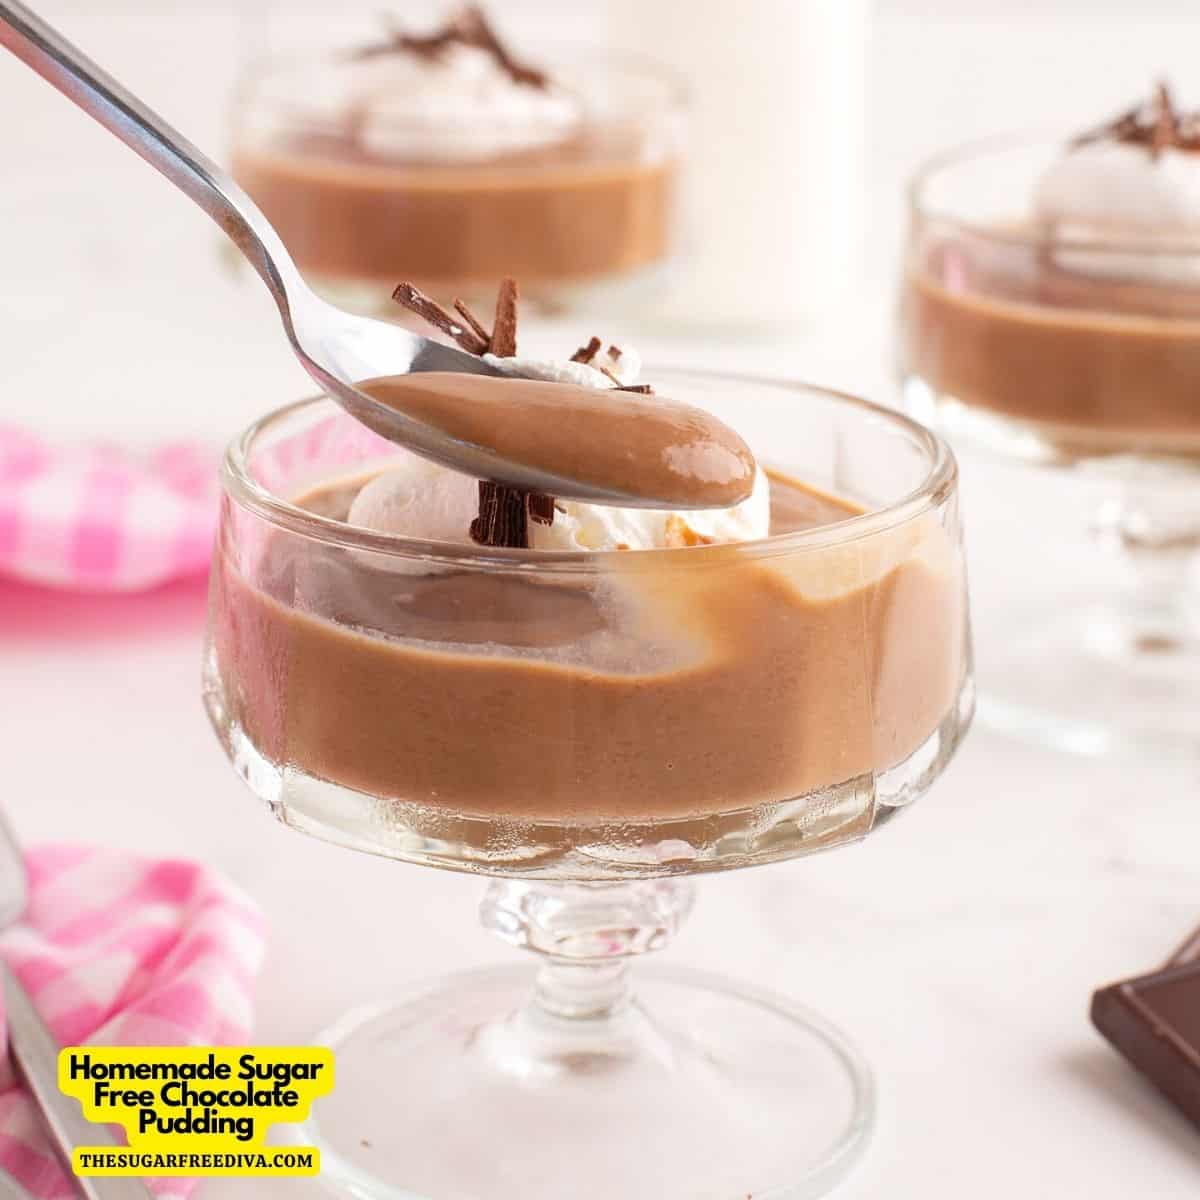 Homemade Sugar Free Chocolate Pudding, a simple, delicious and easy recipe made from scratch in about 20 minutes, with no added sugar.